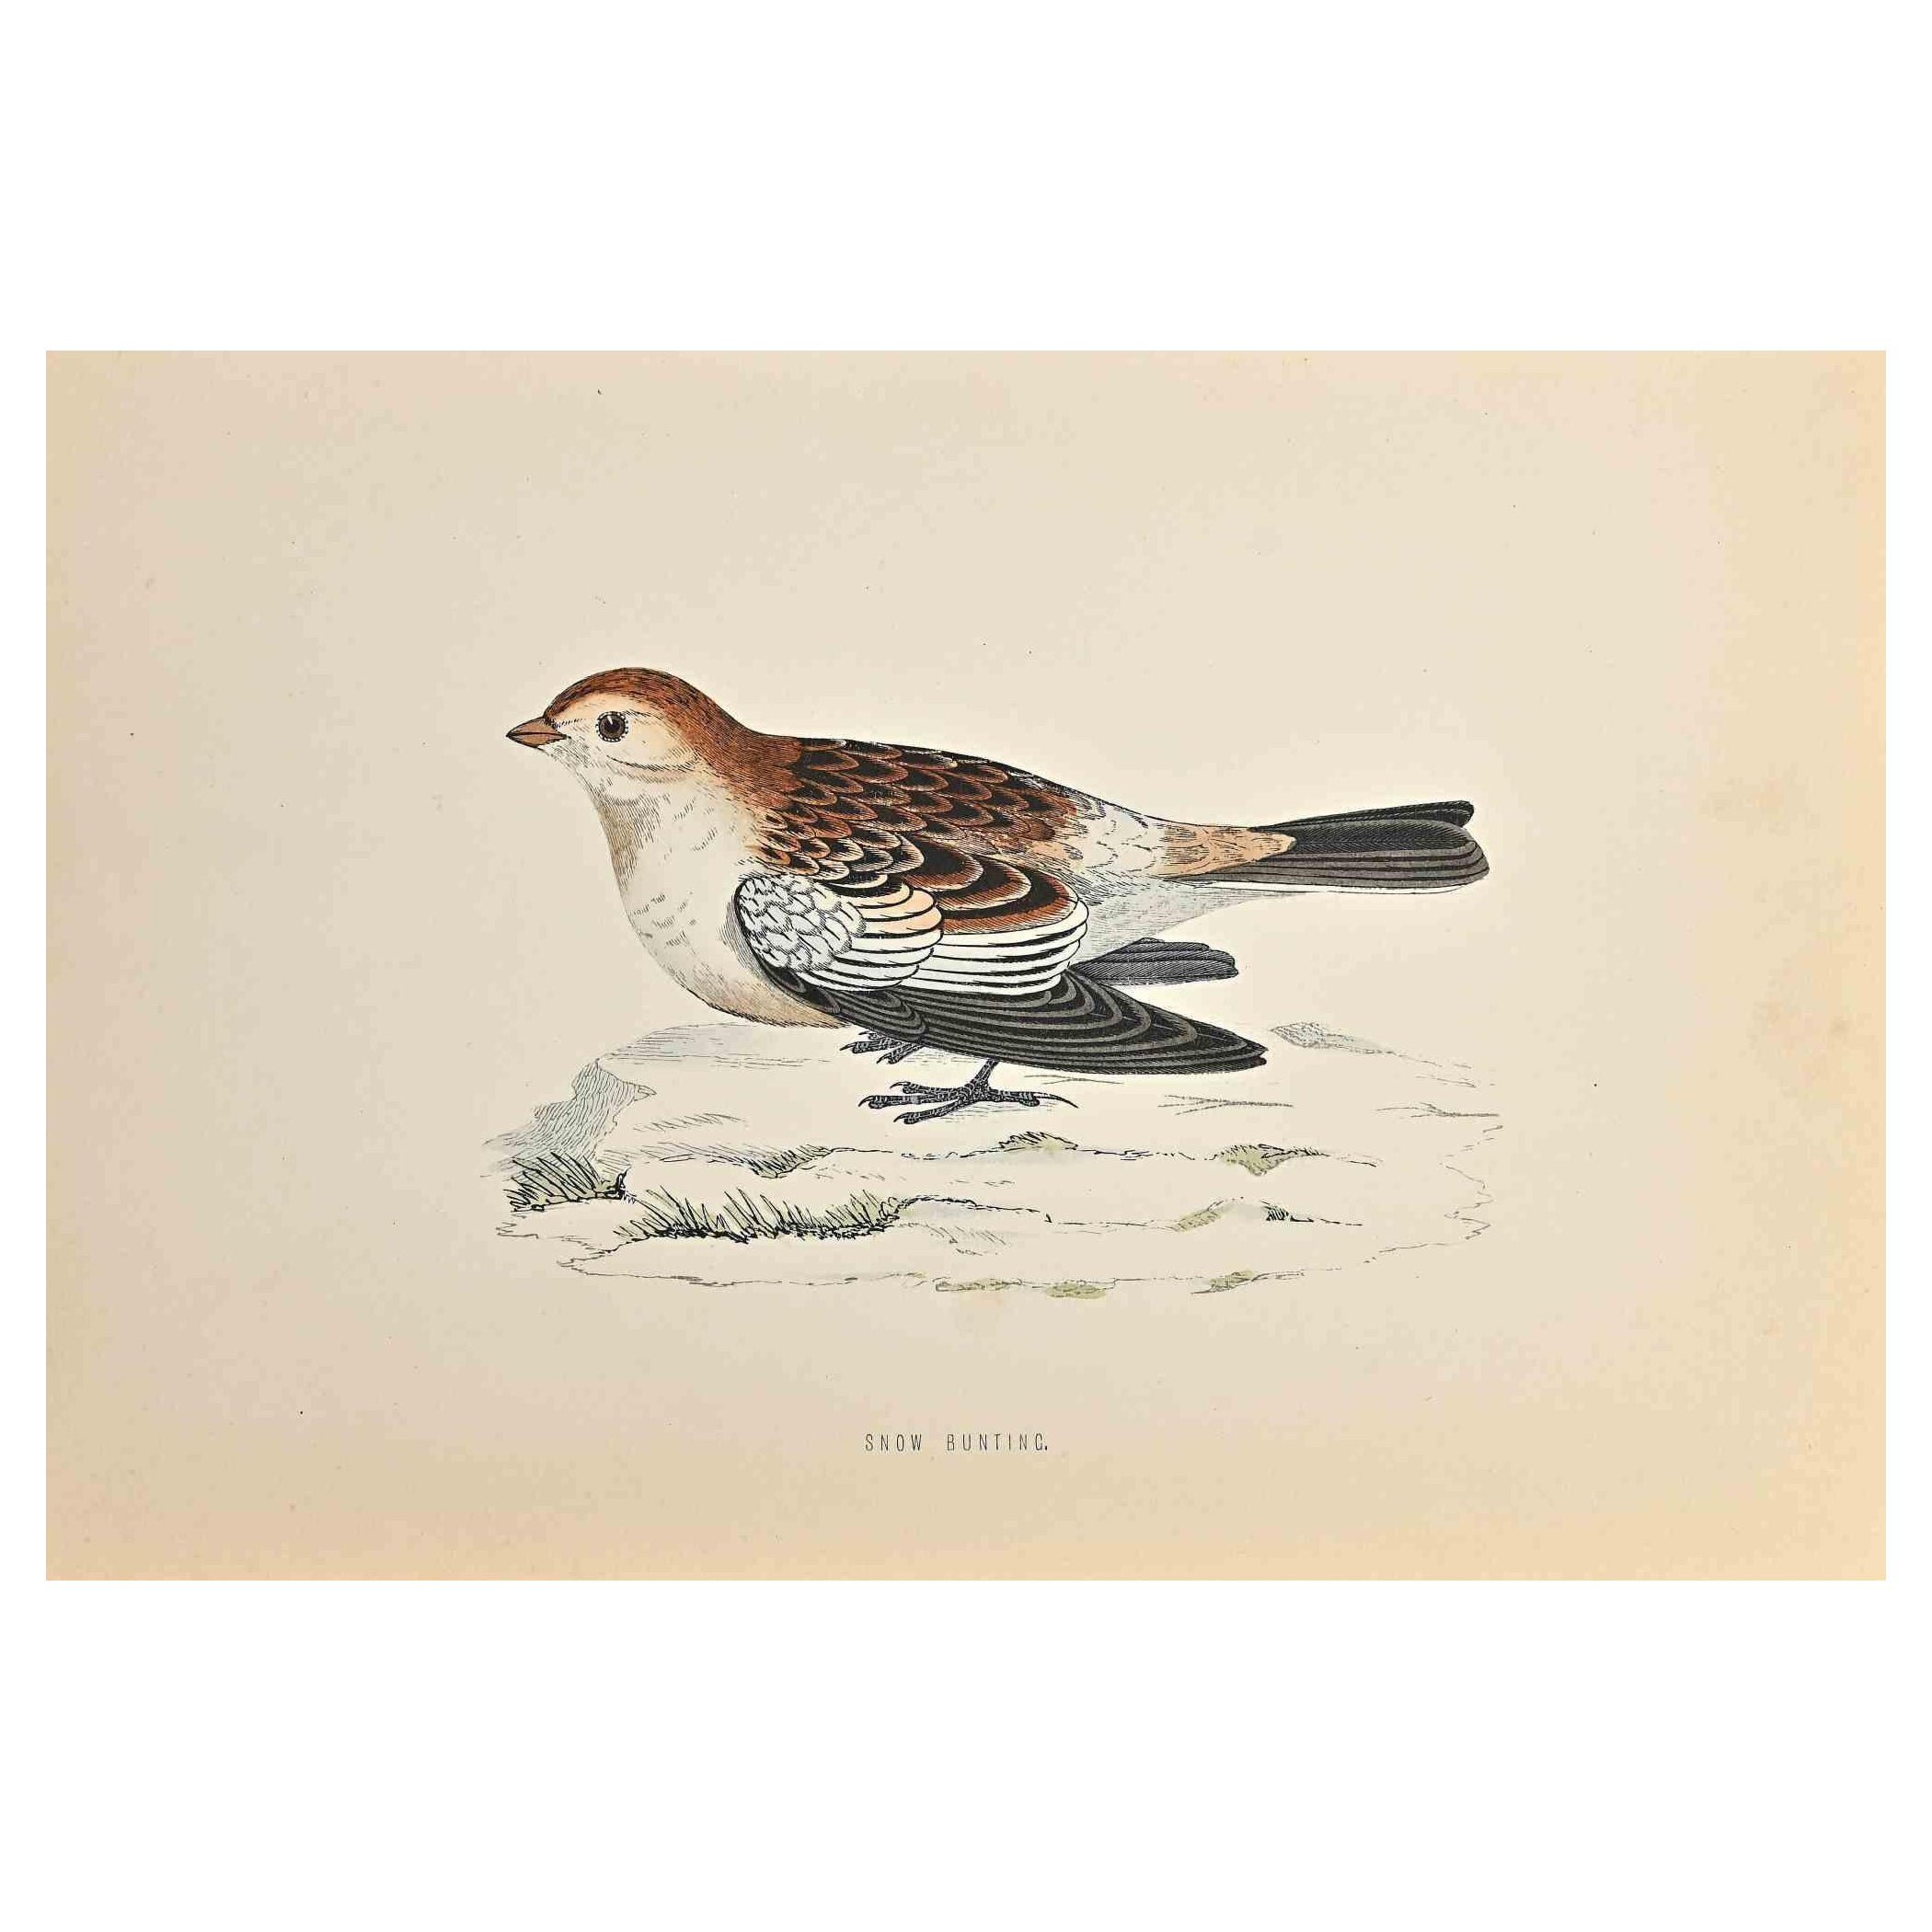 Snow Bunting is a modern artwork realized in 1870 by the British artist Alexander Francis Lydon (1836-1917) . 

Woodcut print, hand colored, published by London, Bell & Sons, 1870.  Name of the bird printed in plate. This work is part of a print